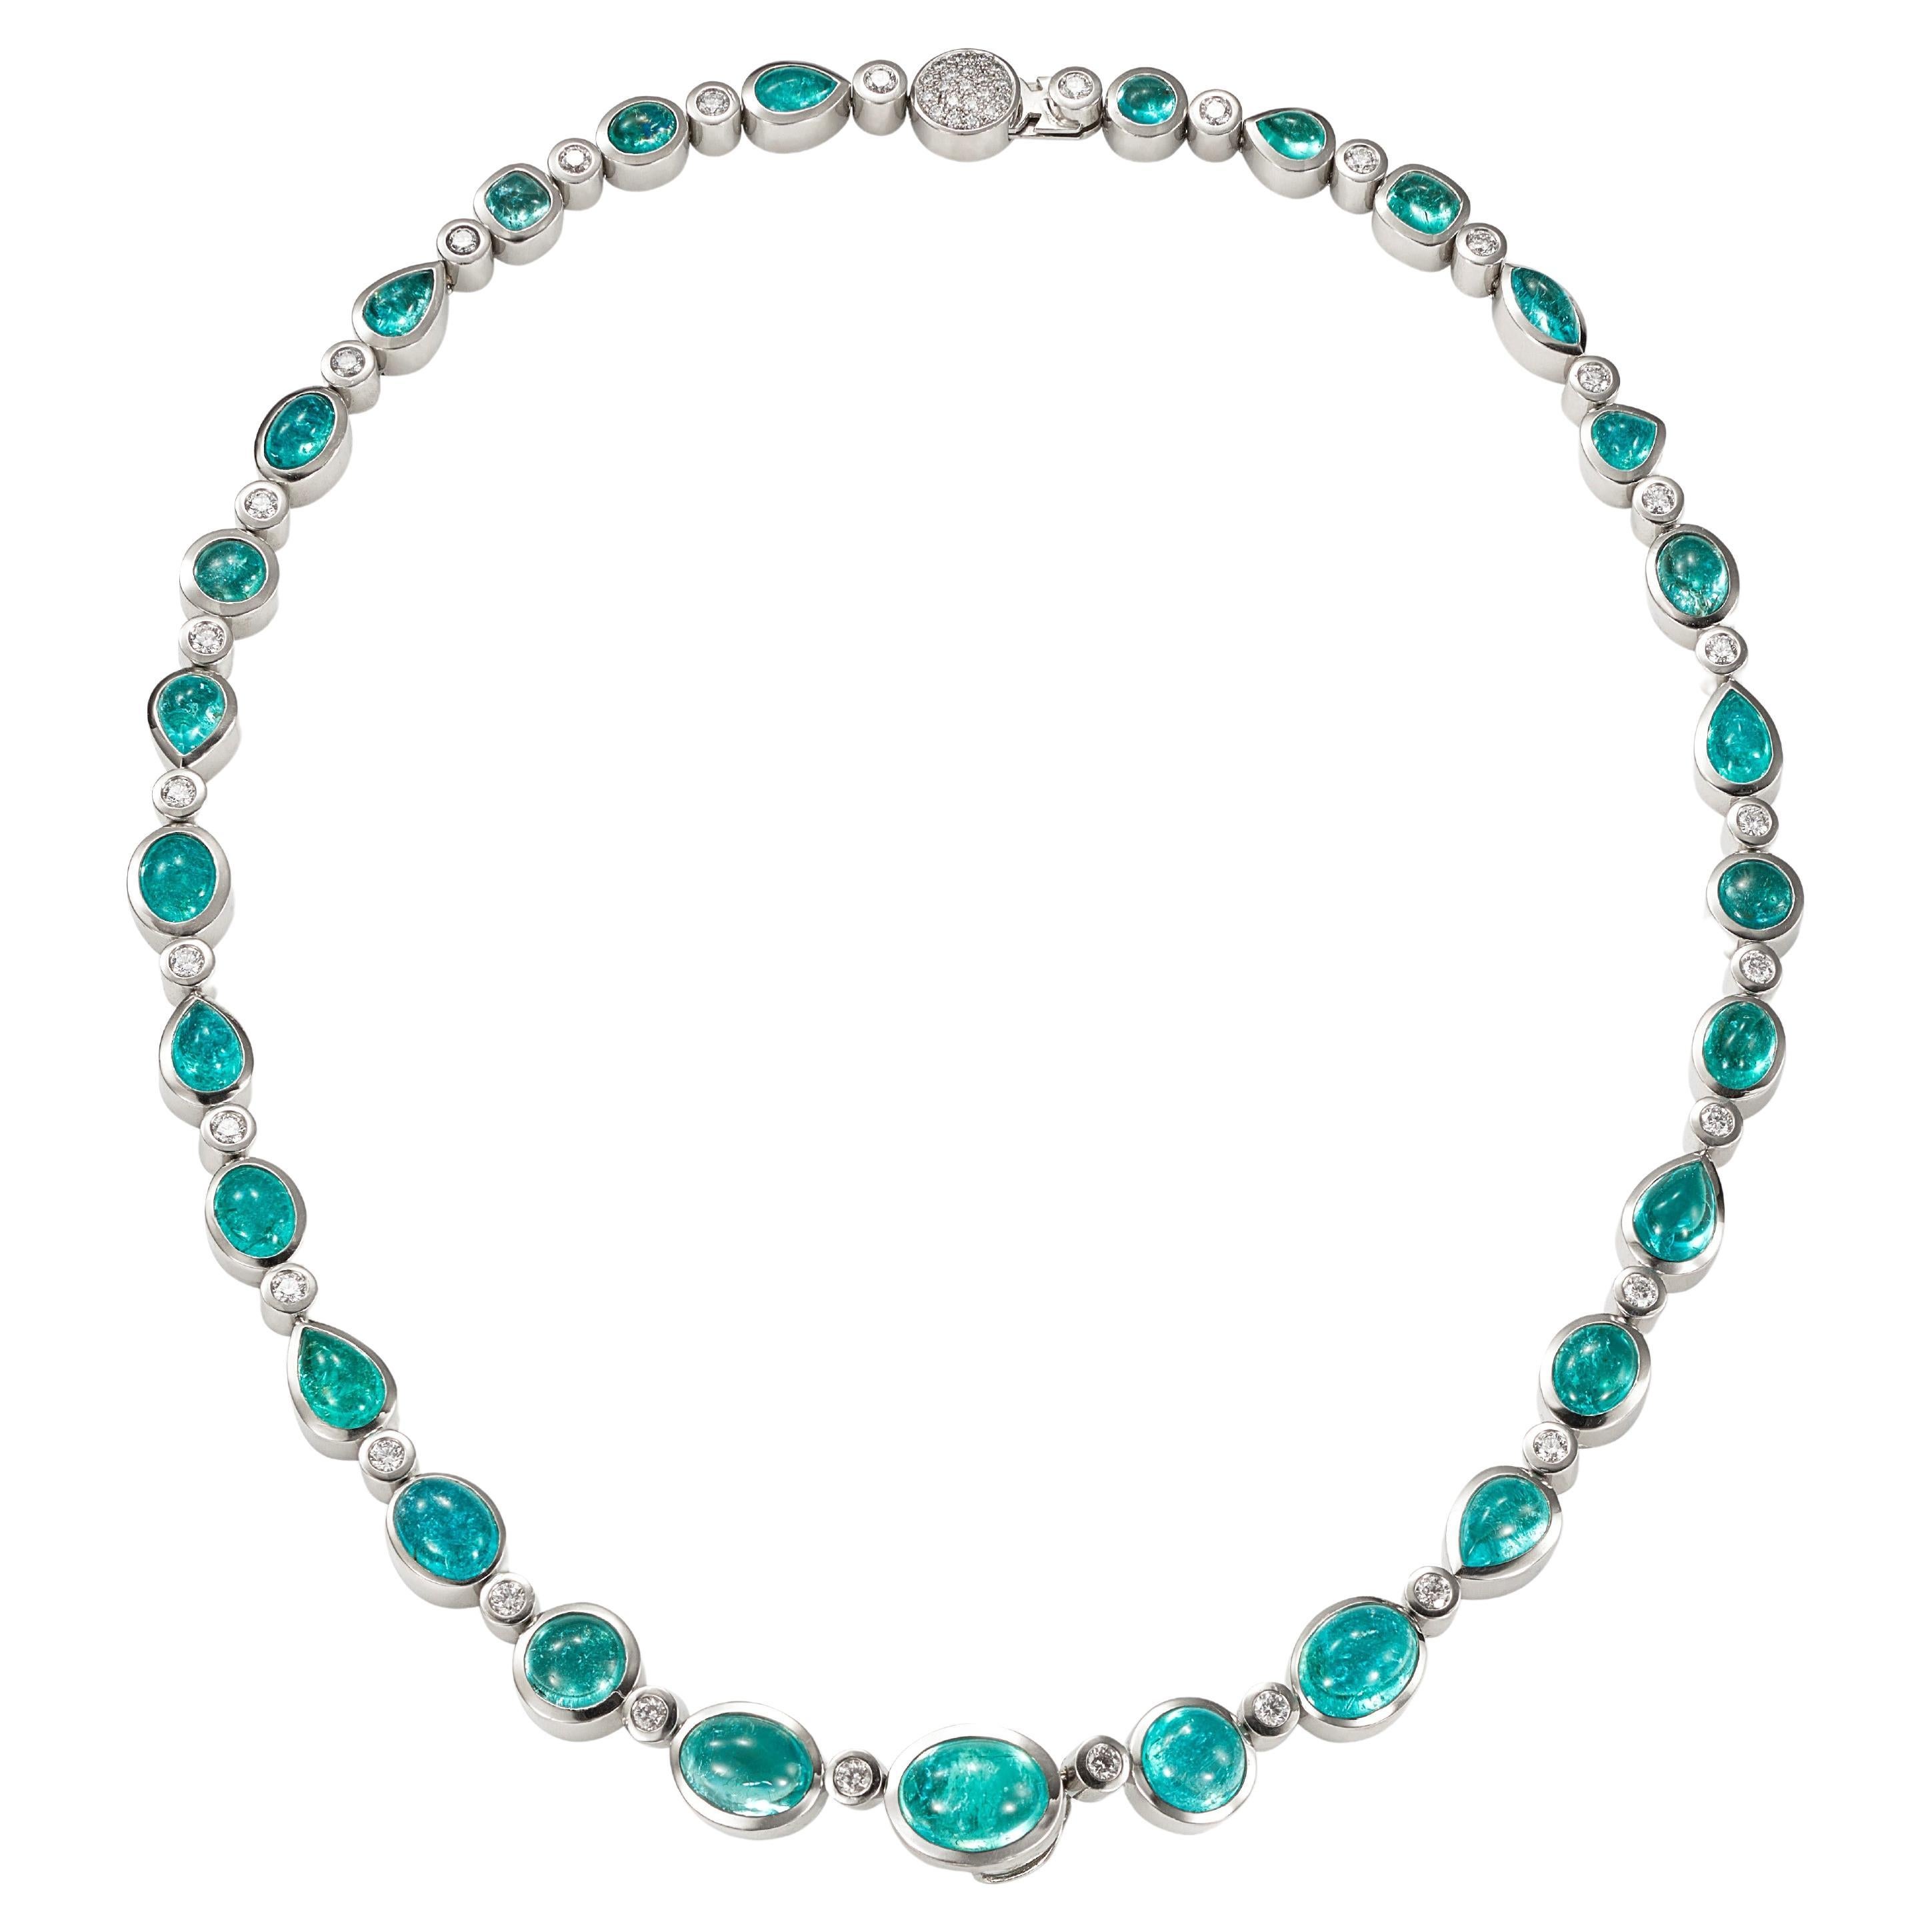 Necklace in Platinum with 29 Paraiba Tourmaline Cabouchons and 46 Diamonds